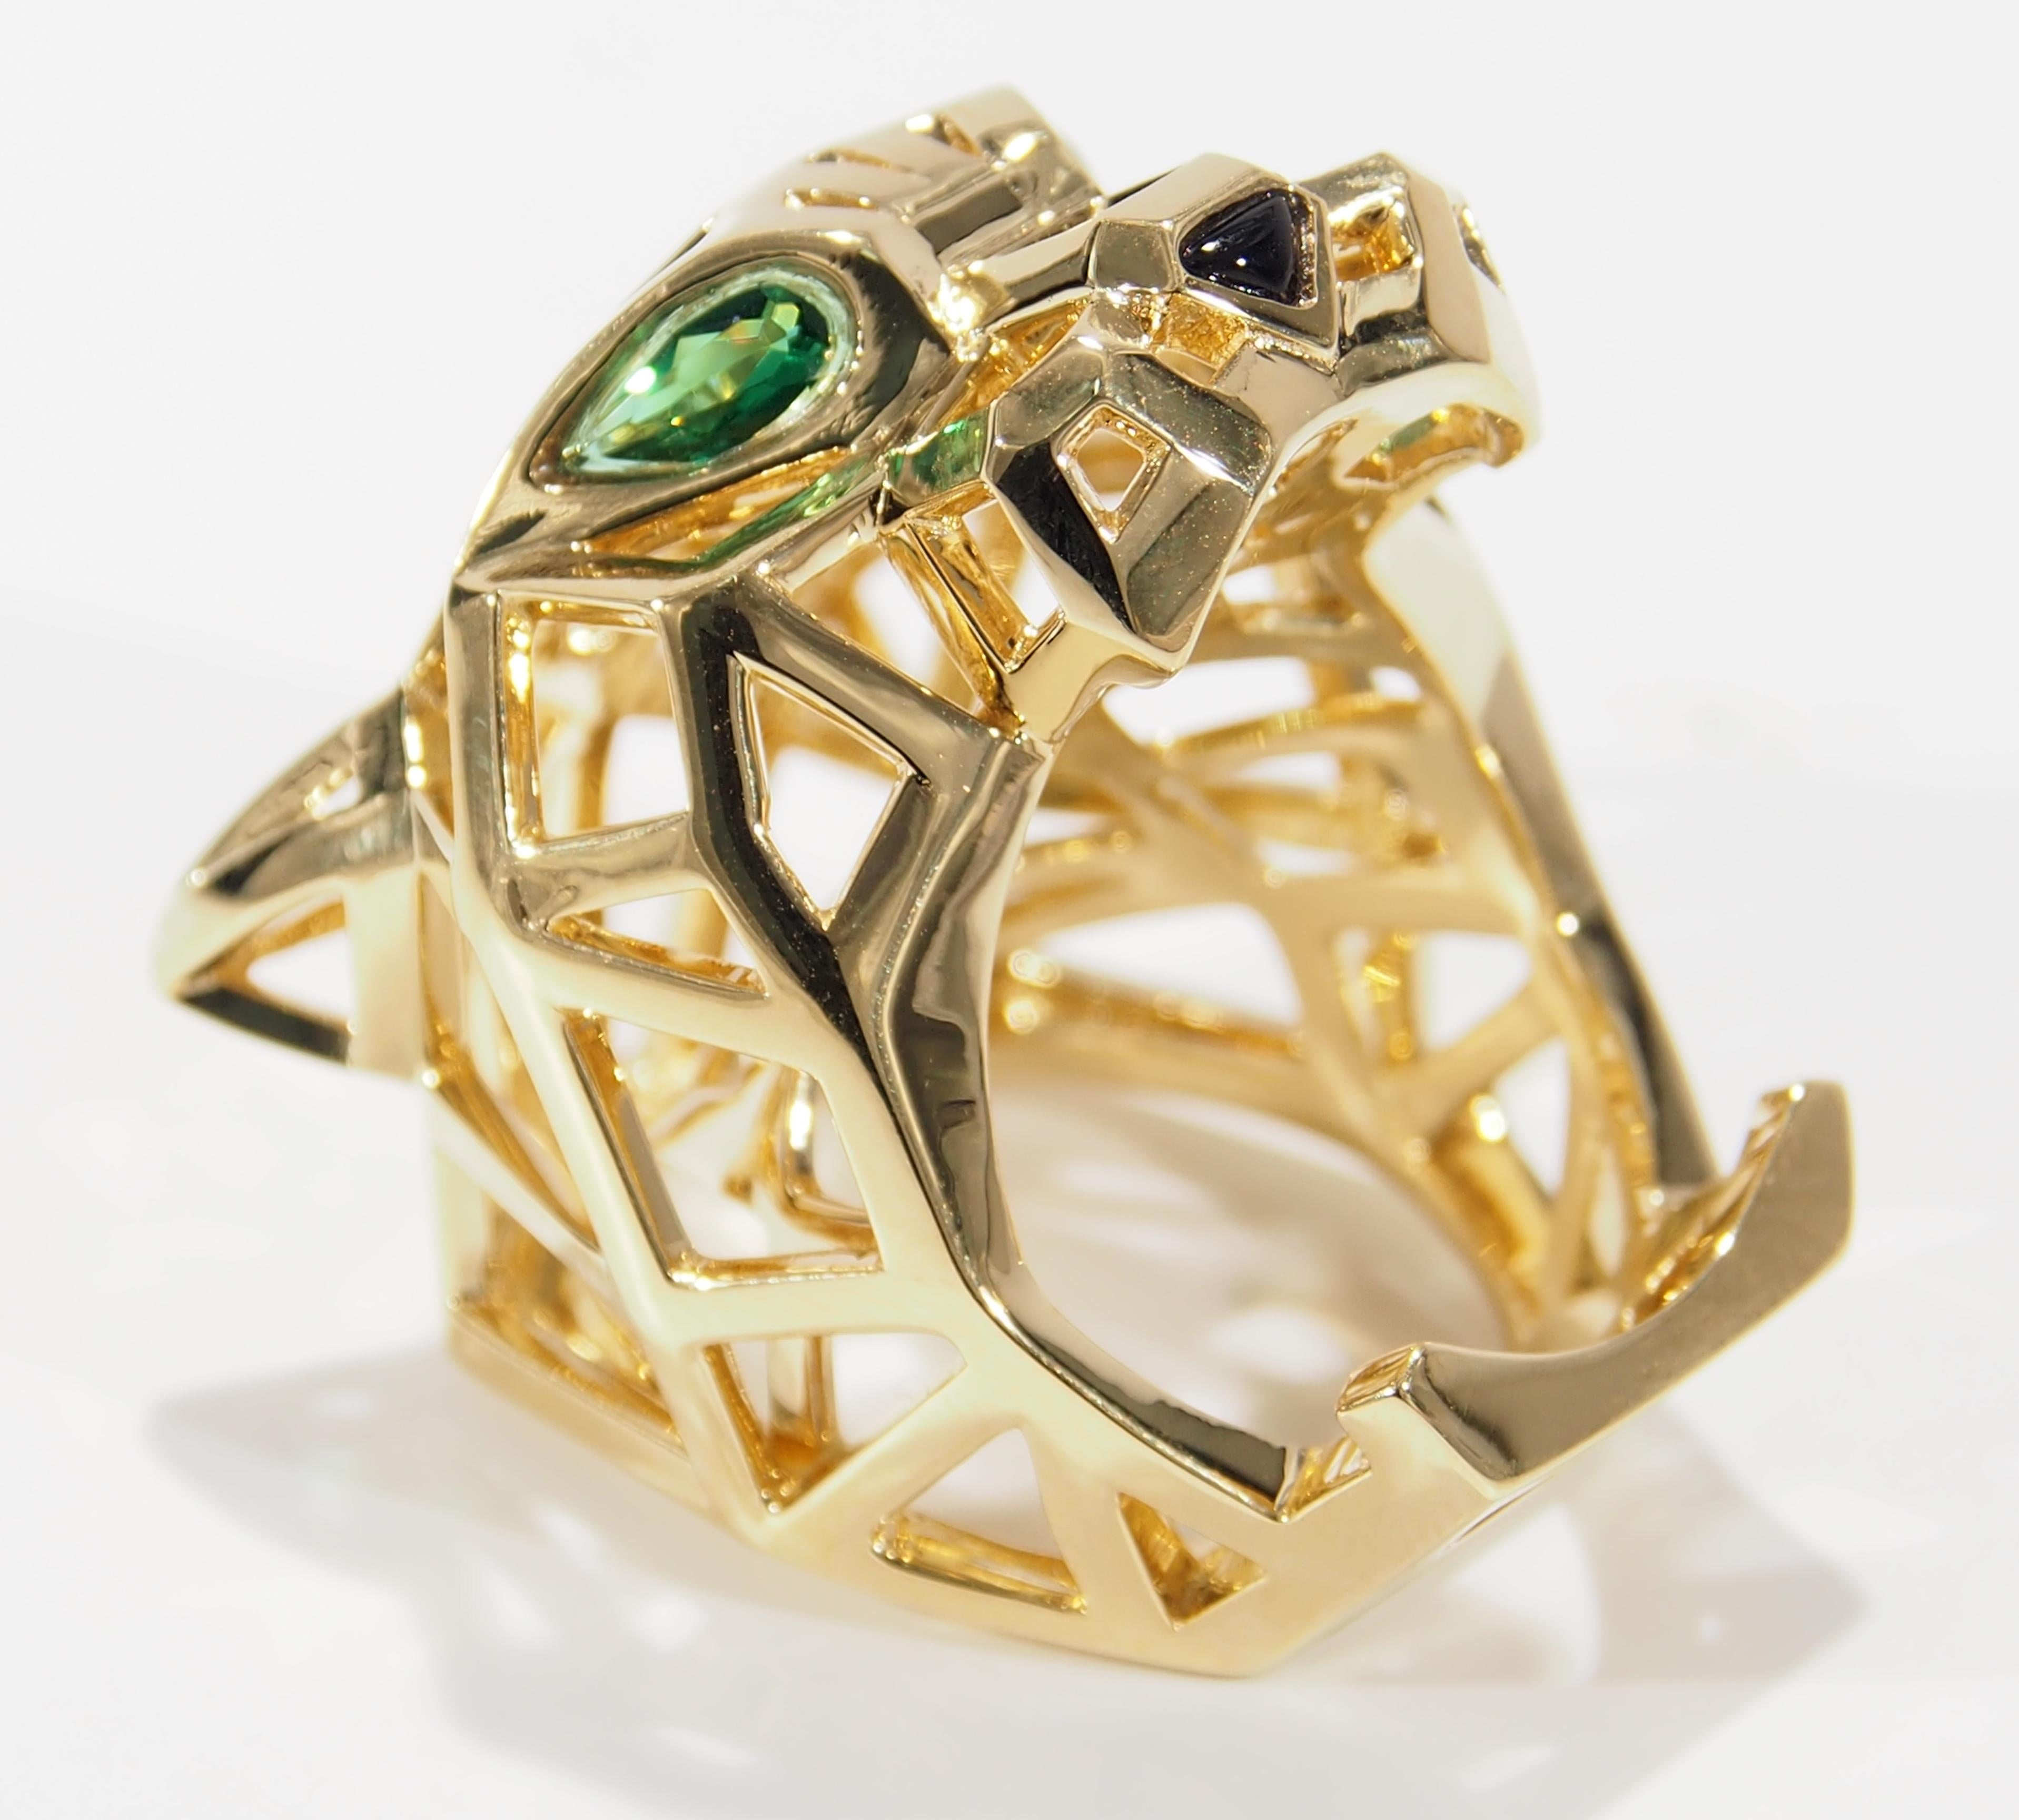 This is the iconic Cartier Panthere Ring first made desirable in jewelry design by Louis Cartier and has since become the symbolic animal of Cartier jewelry. This Cartier Panthere is stunningly designed with a geometric version of the animal's head.